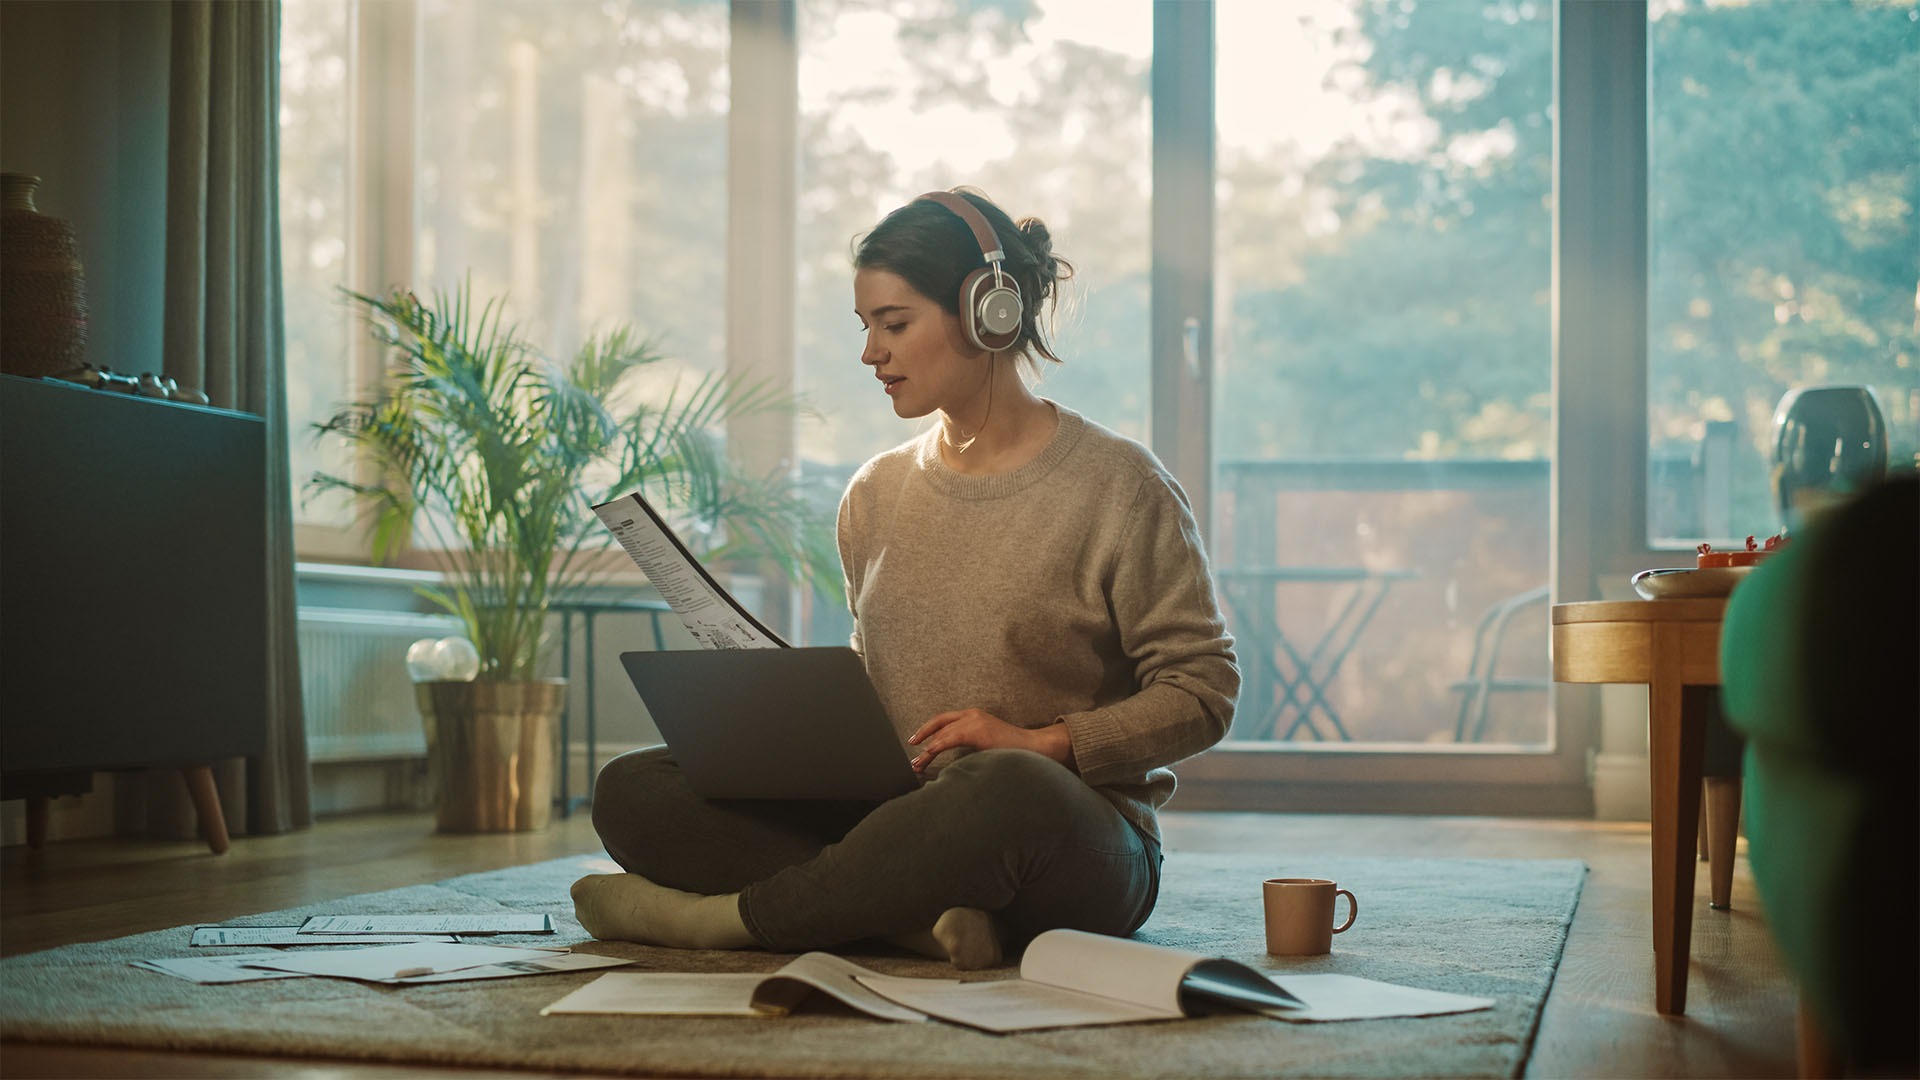 Young Woman Using Laptop at Home, Does Remote Work, Listens Music through Headphones. Beautiful Smiling Girl Sitting on the Floor Does Research on Papers, Documents, Brainstorms Creative Project, Working from home, Garden Pods, Garden Studio, Vivid Pods